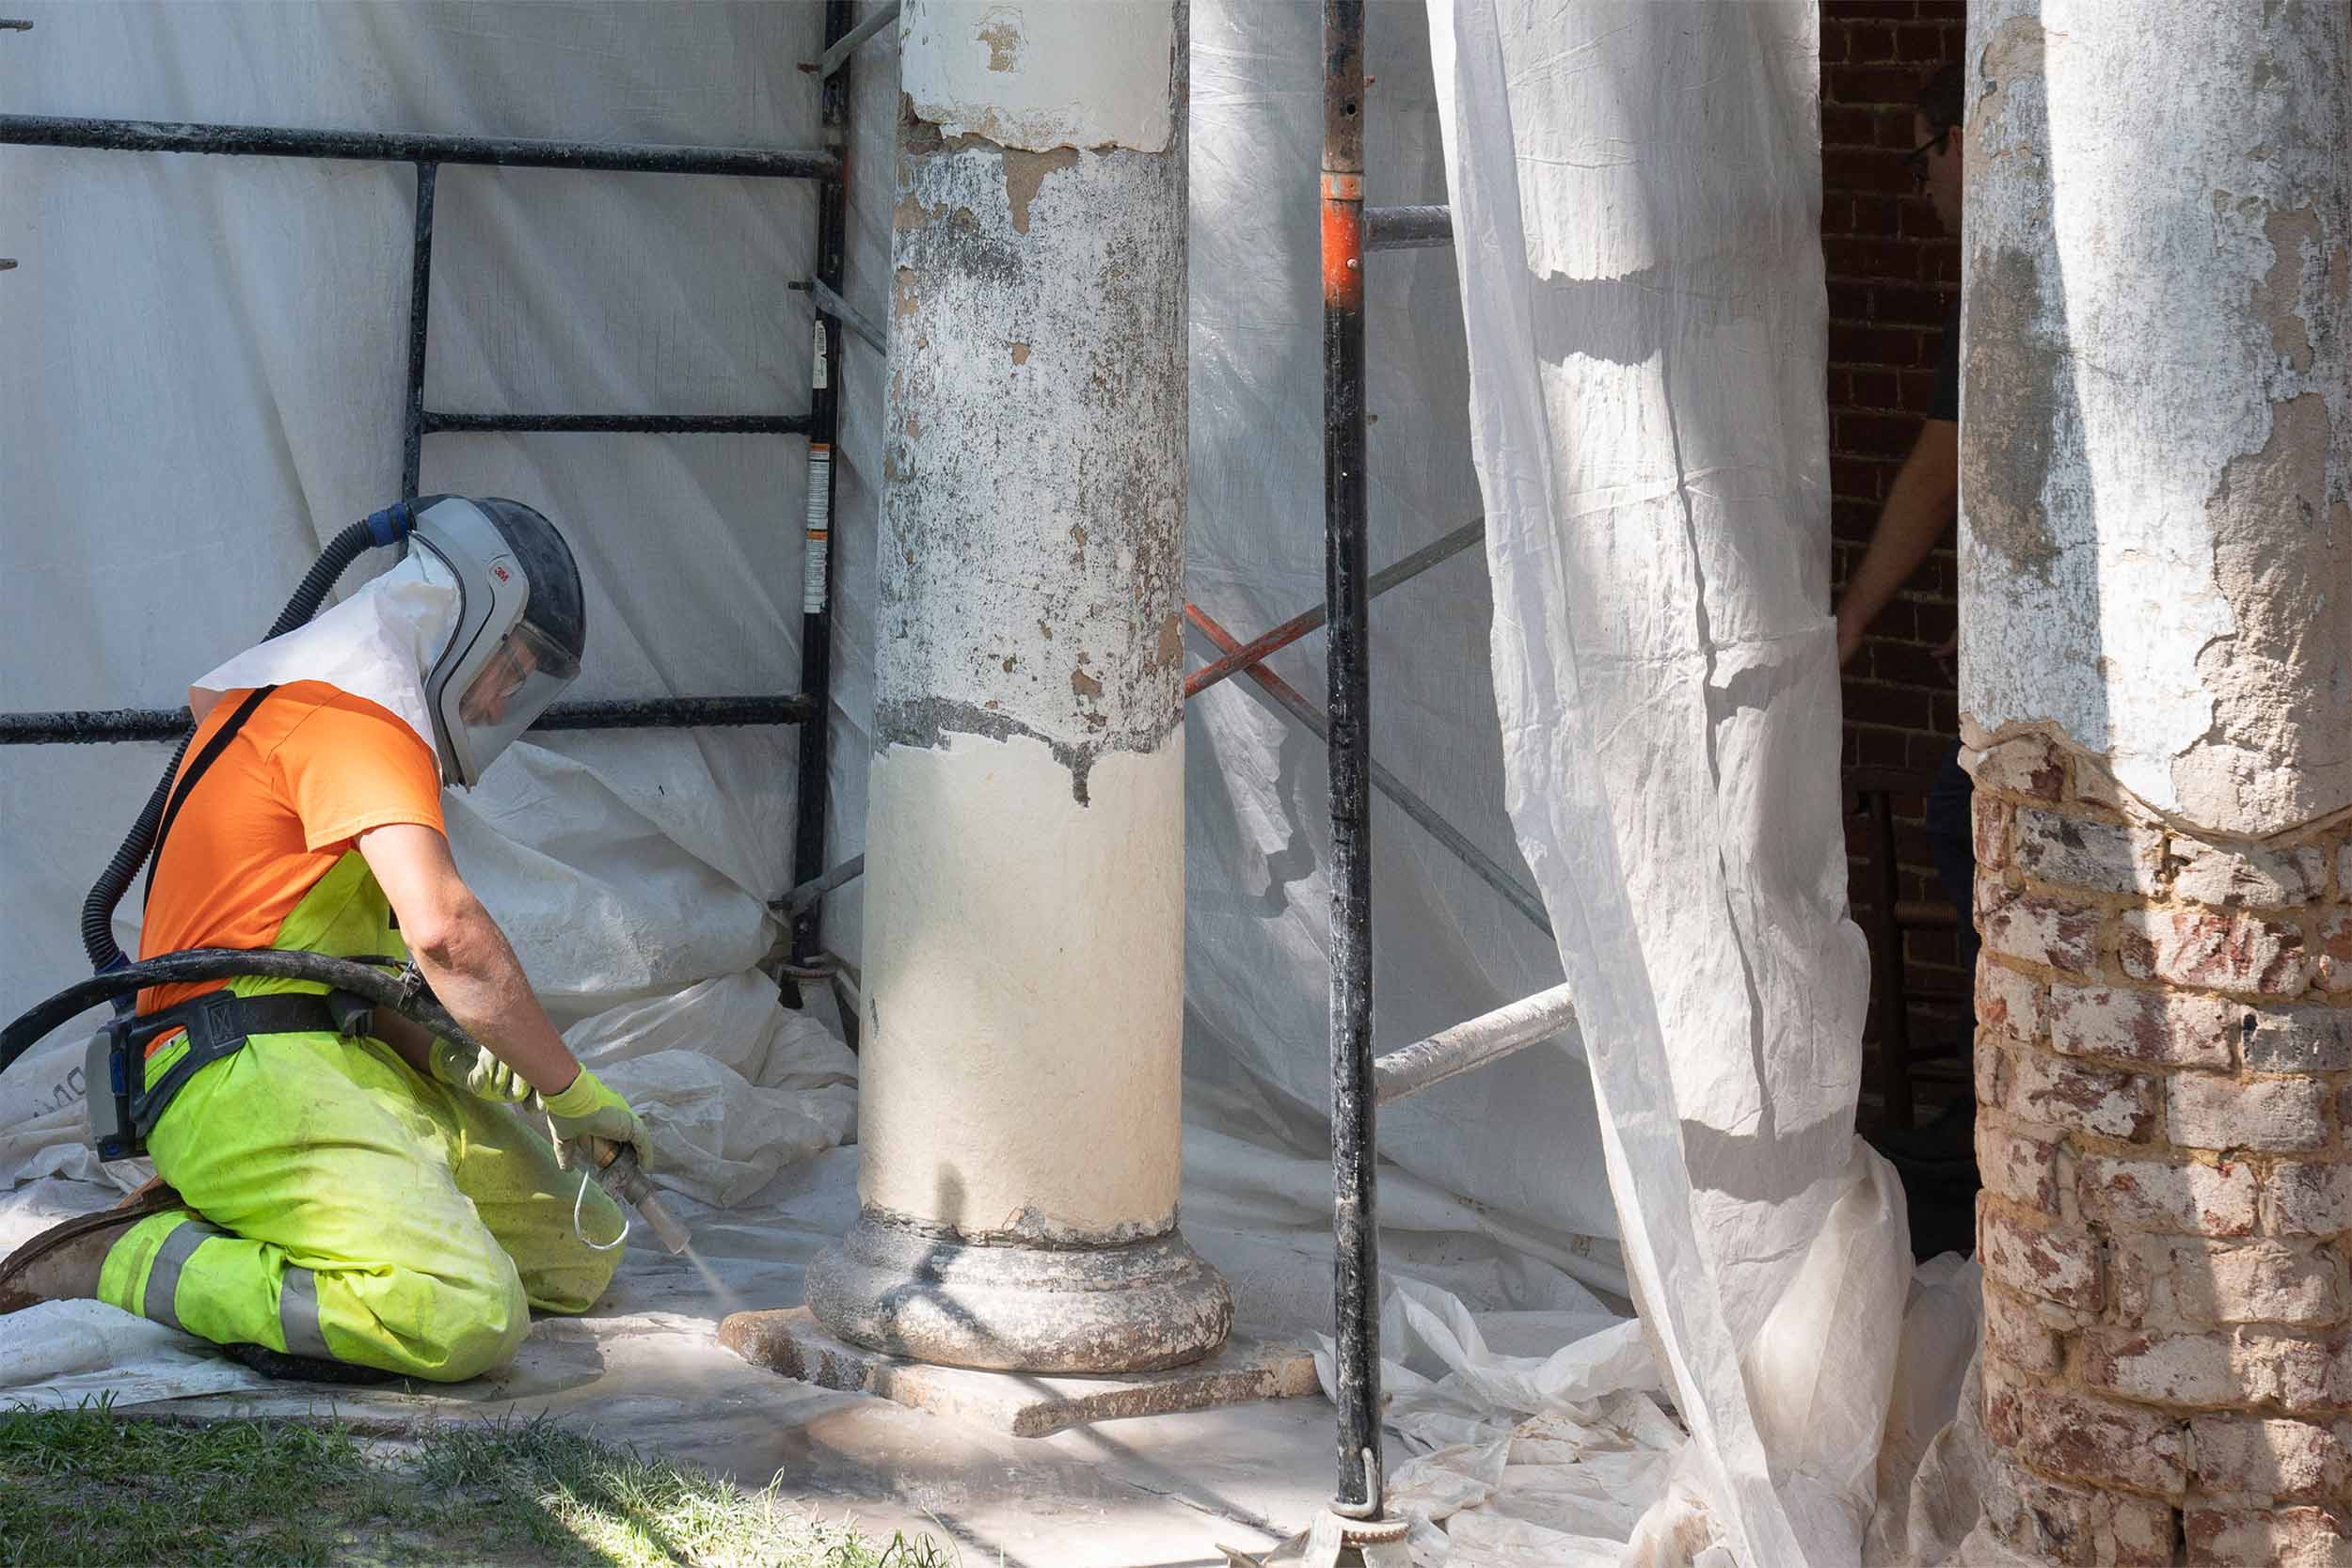 Construction worker kneeling down next to column with face covering